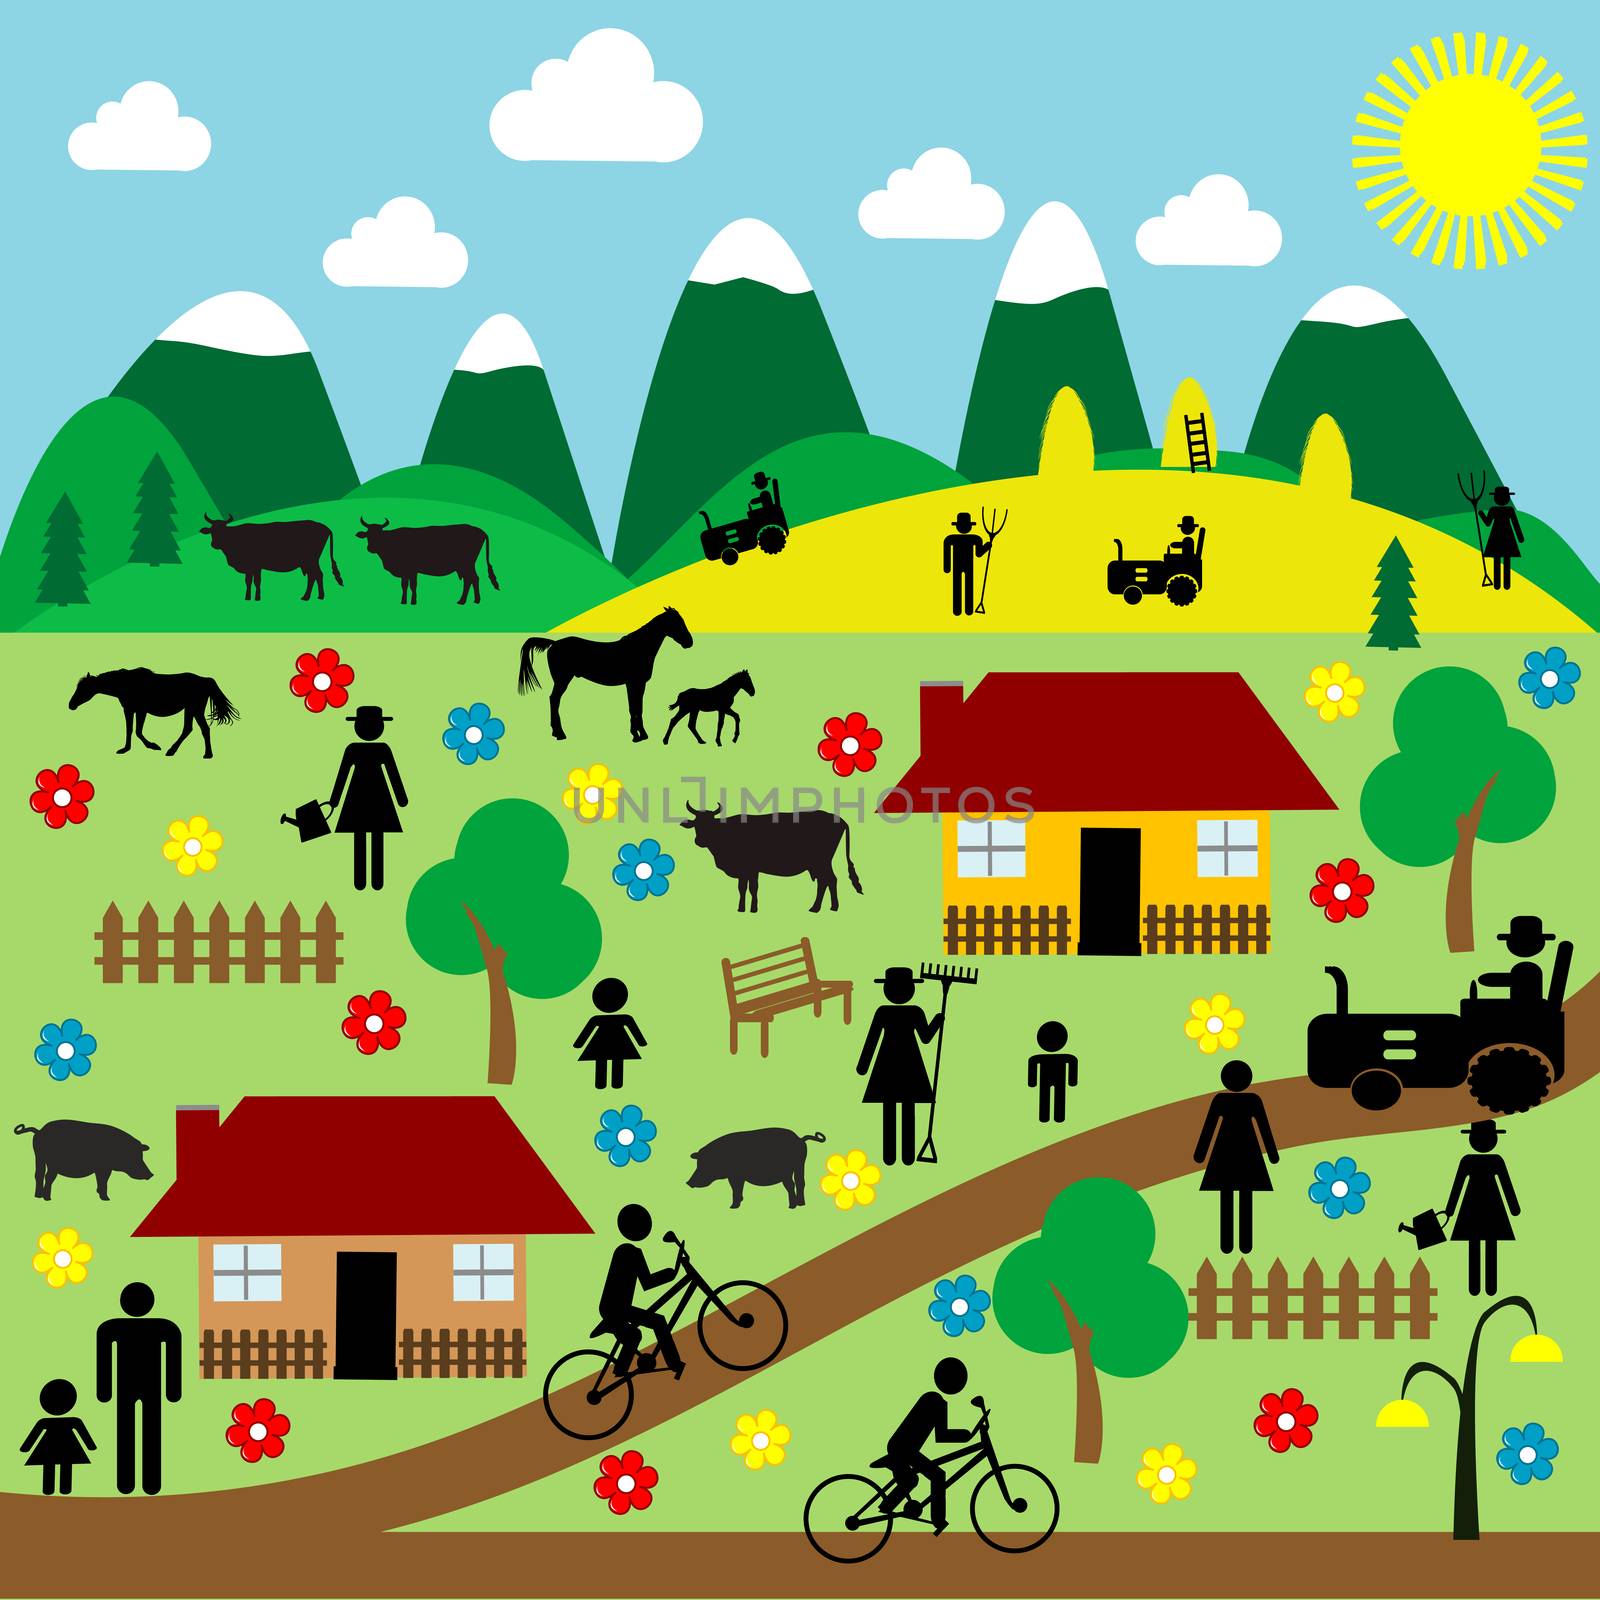 Countryside scene with pictograms by hibrida13